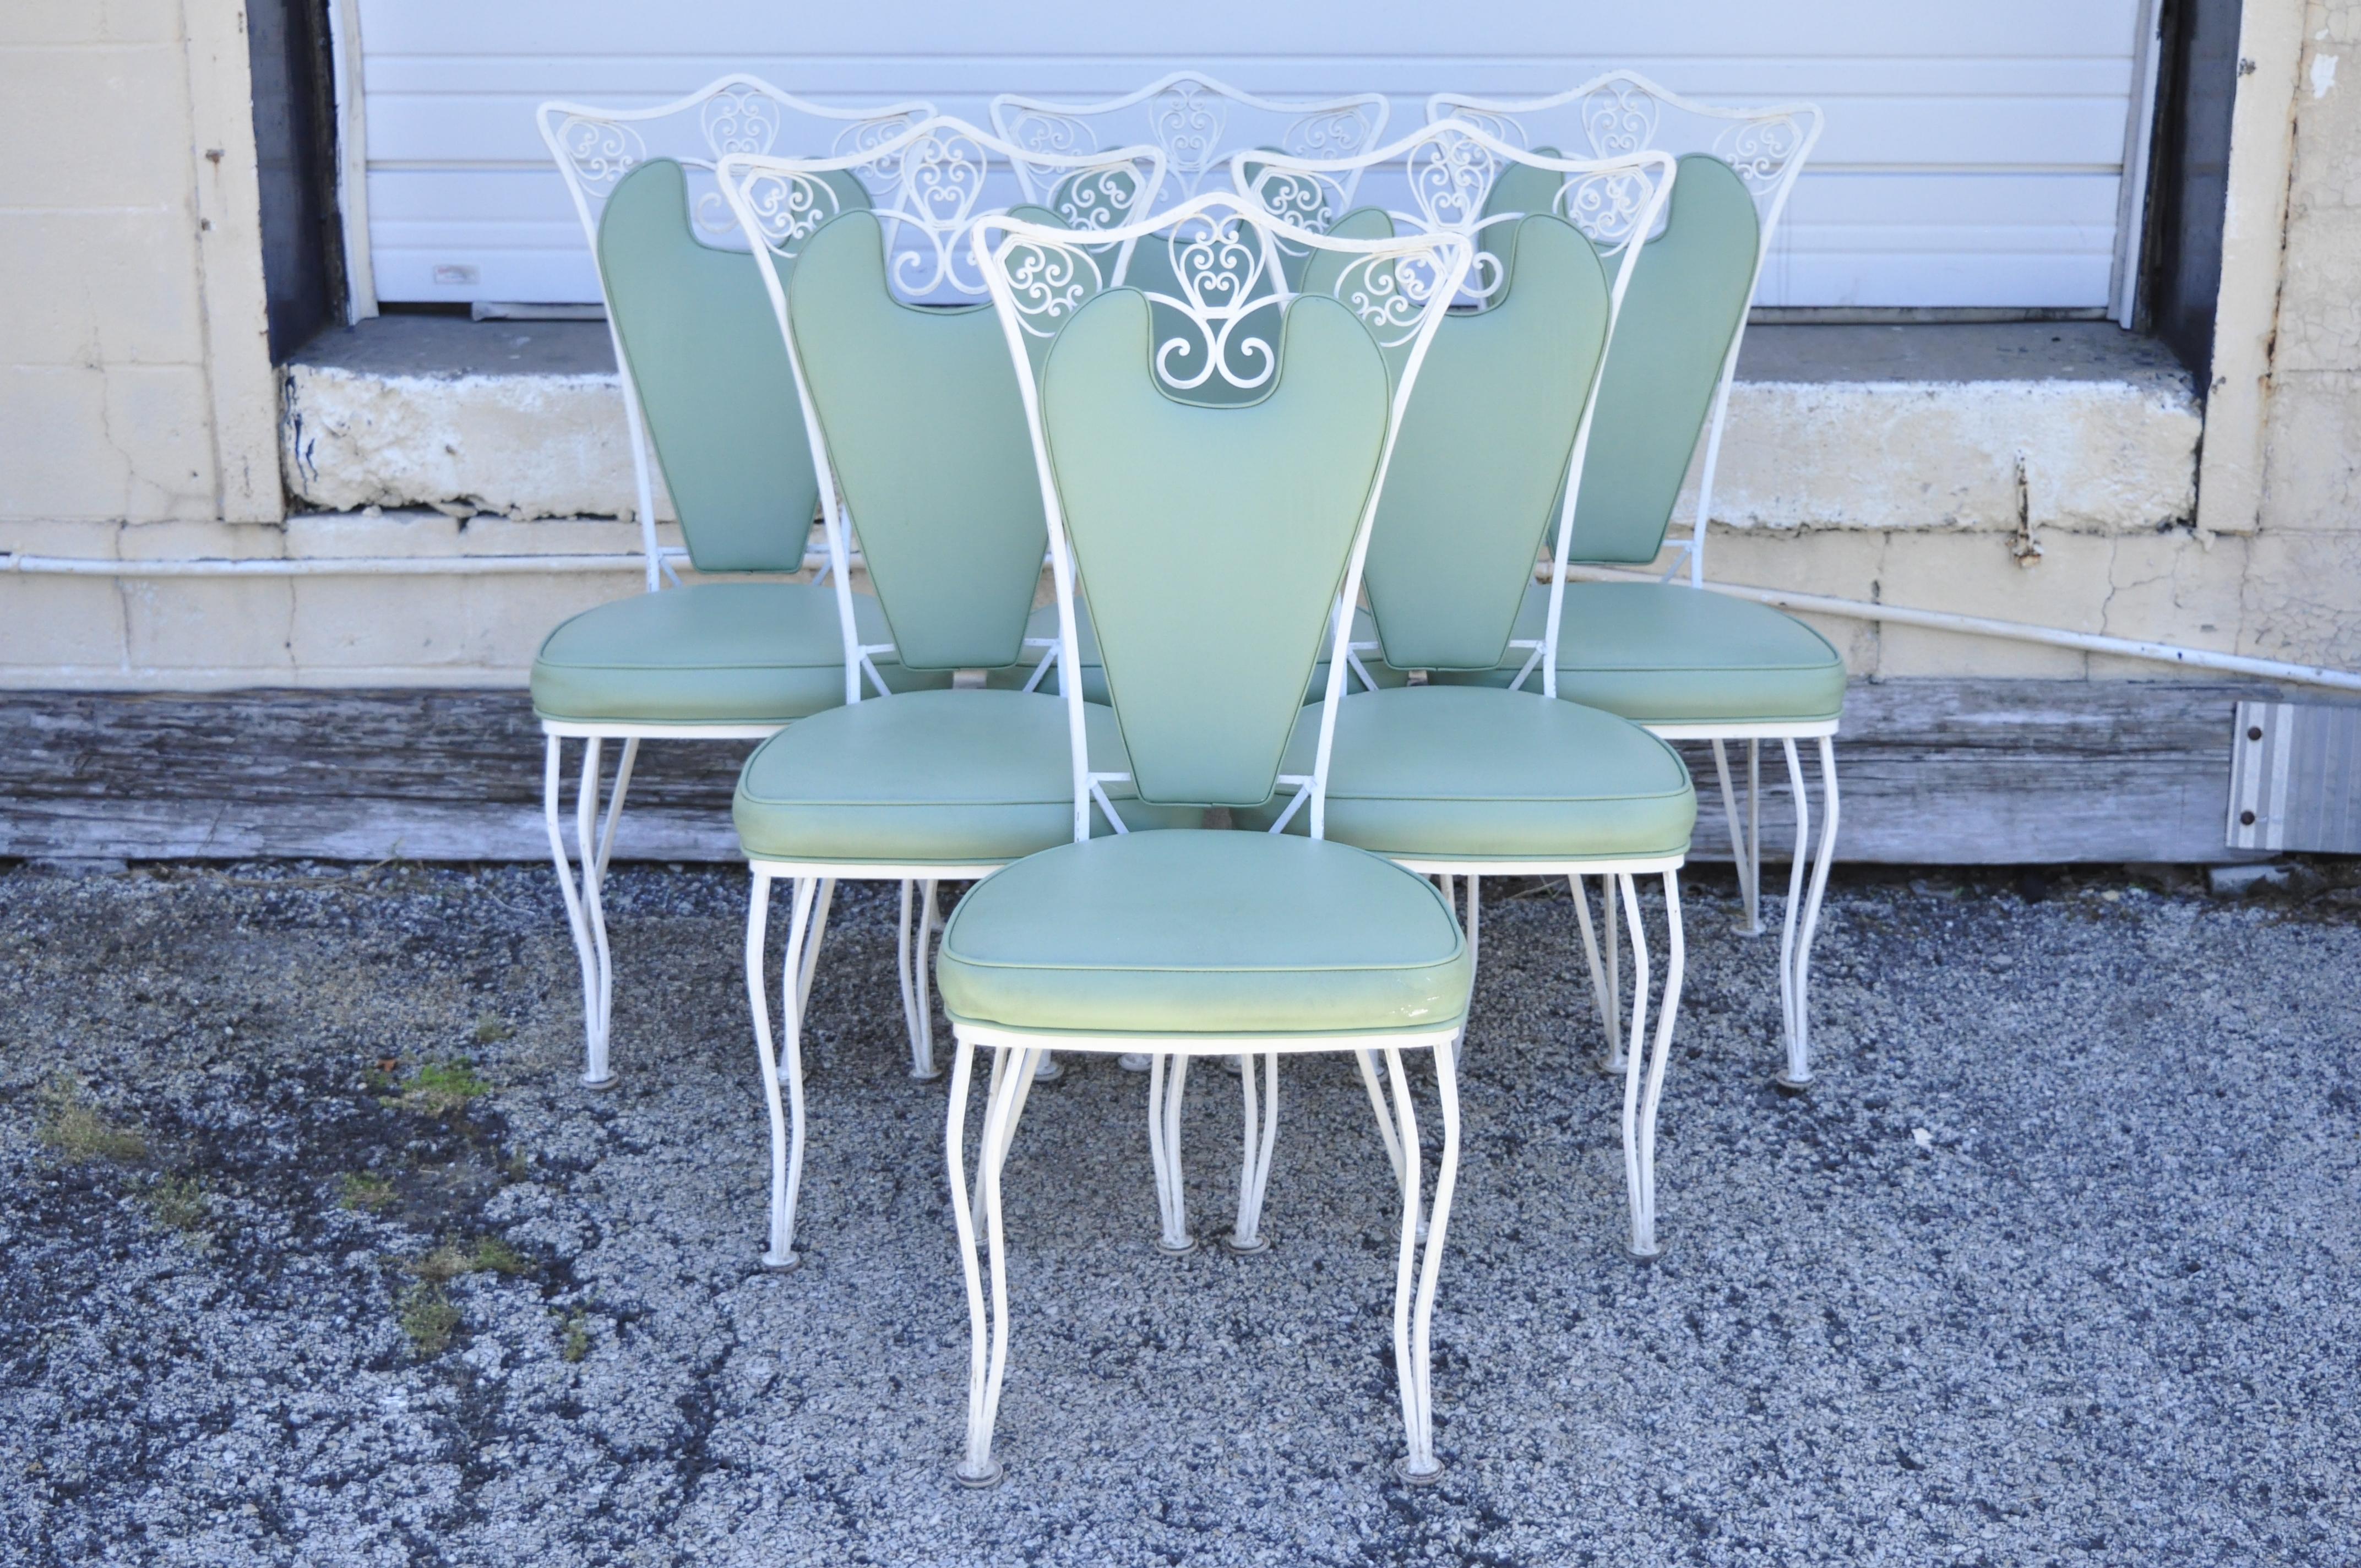 Vintage Regency wrought iron dining set oval table 6 chairs mint green vinyl - 7pc set. Item features (6) dining side chairs, mint green vinyl upholstery, wrought iron frames, oval laminate top table with pedestal base, wrought iron construction.